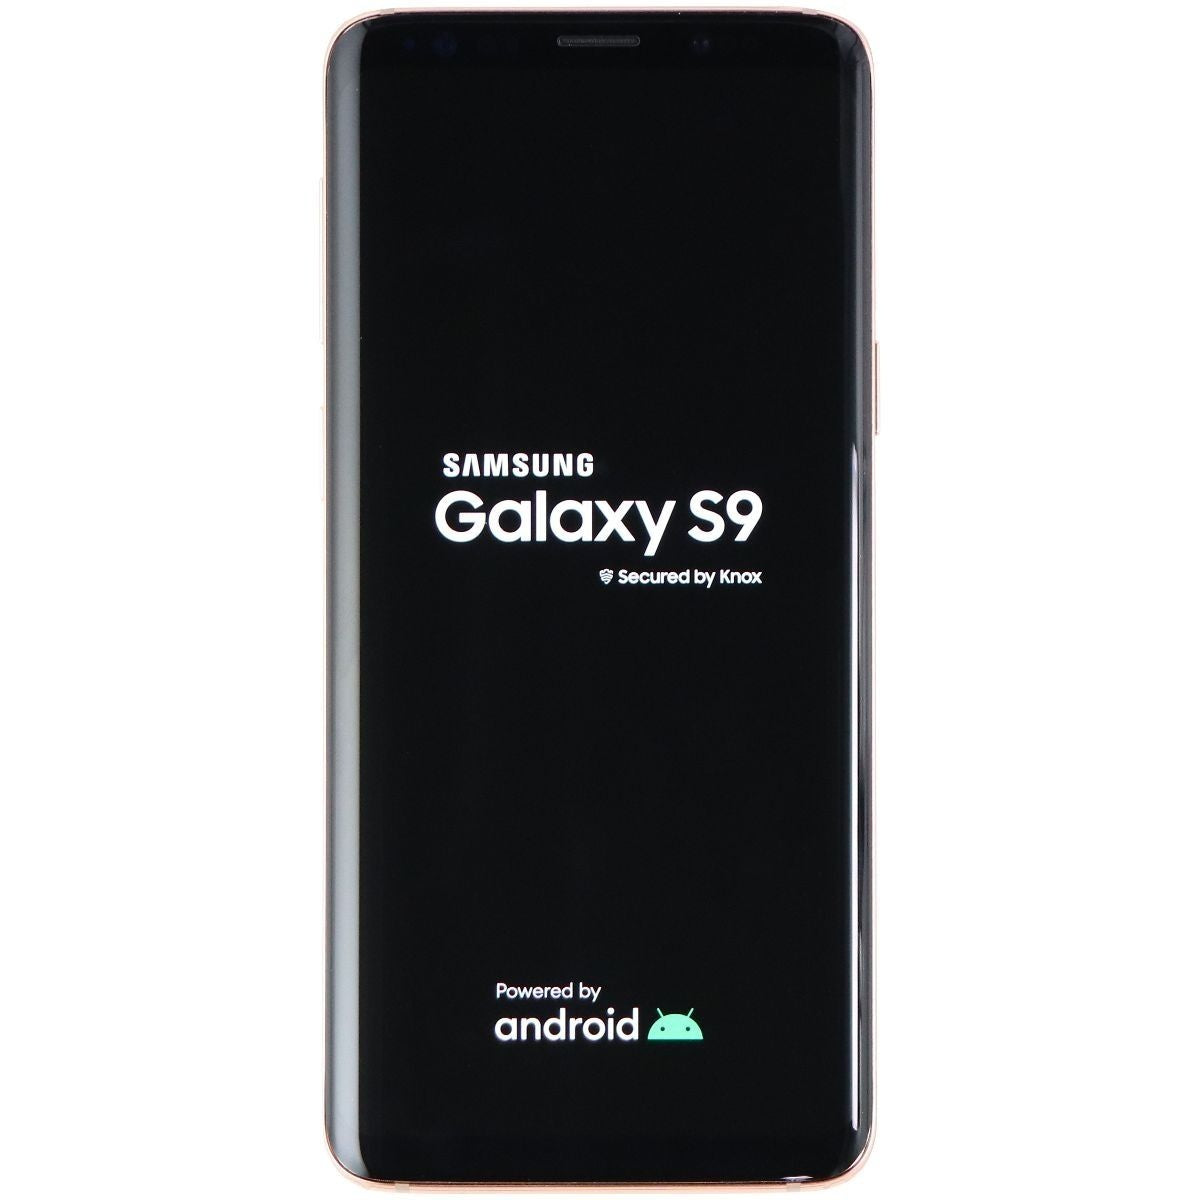 Samsung Galaxy S9 (5.8-in) Smartphone (SM-G960U1) Unlocked - 64GB/Sunrise Gold Cell Phones & Smartphones Samsung    - Simple Cell Bulk Wholesale Pricing - USA Seller